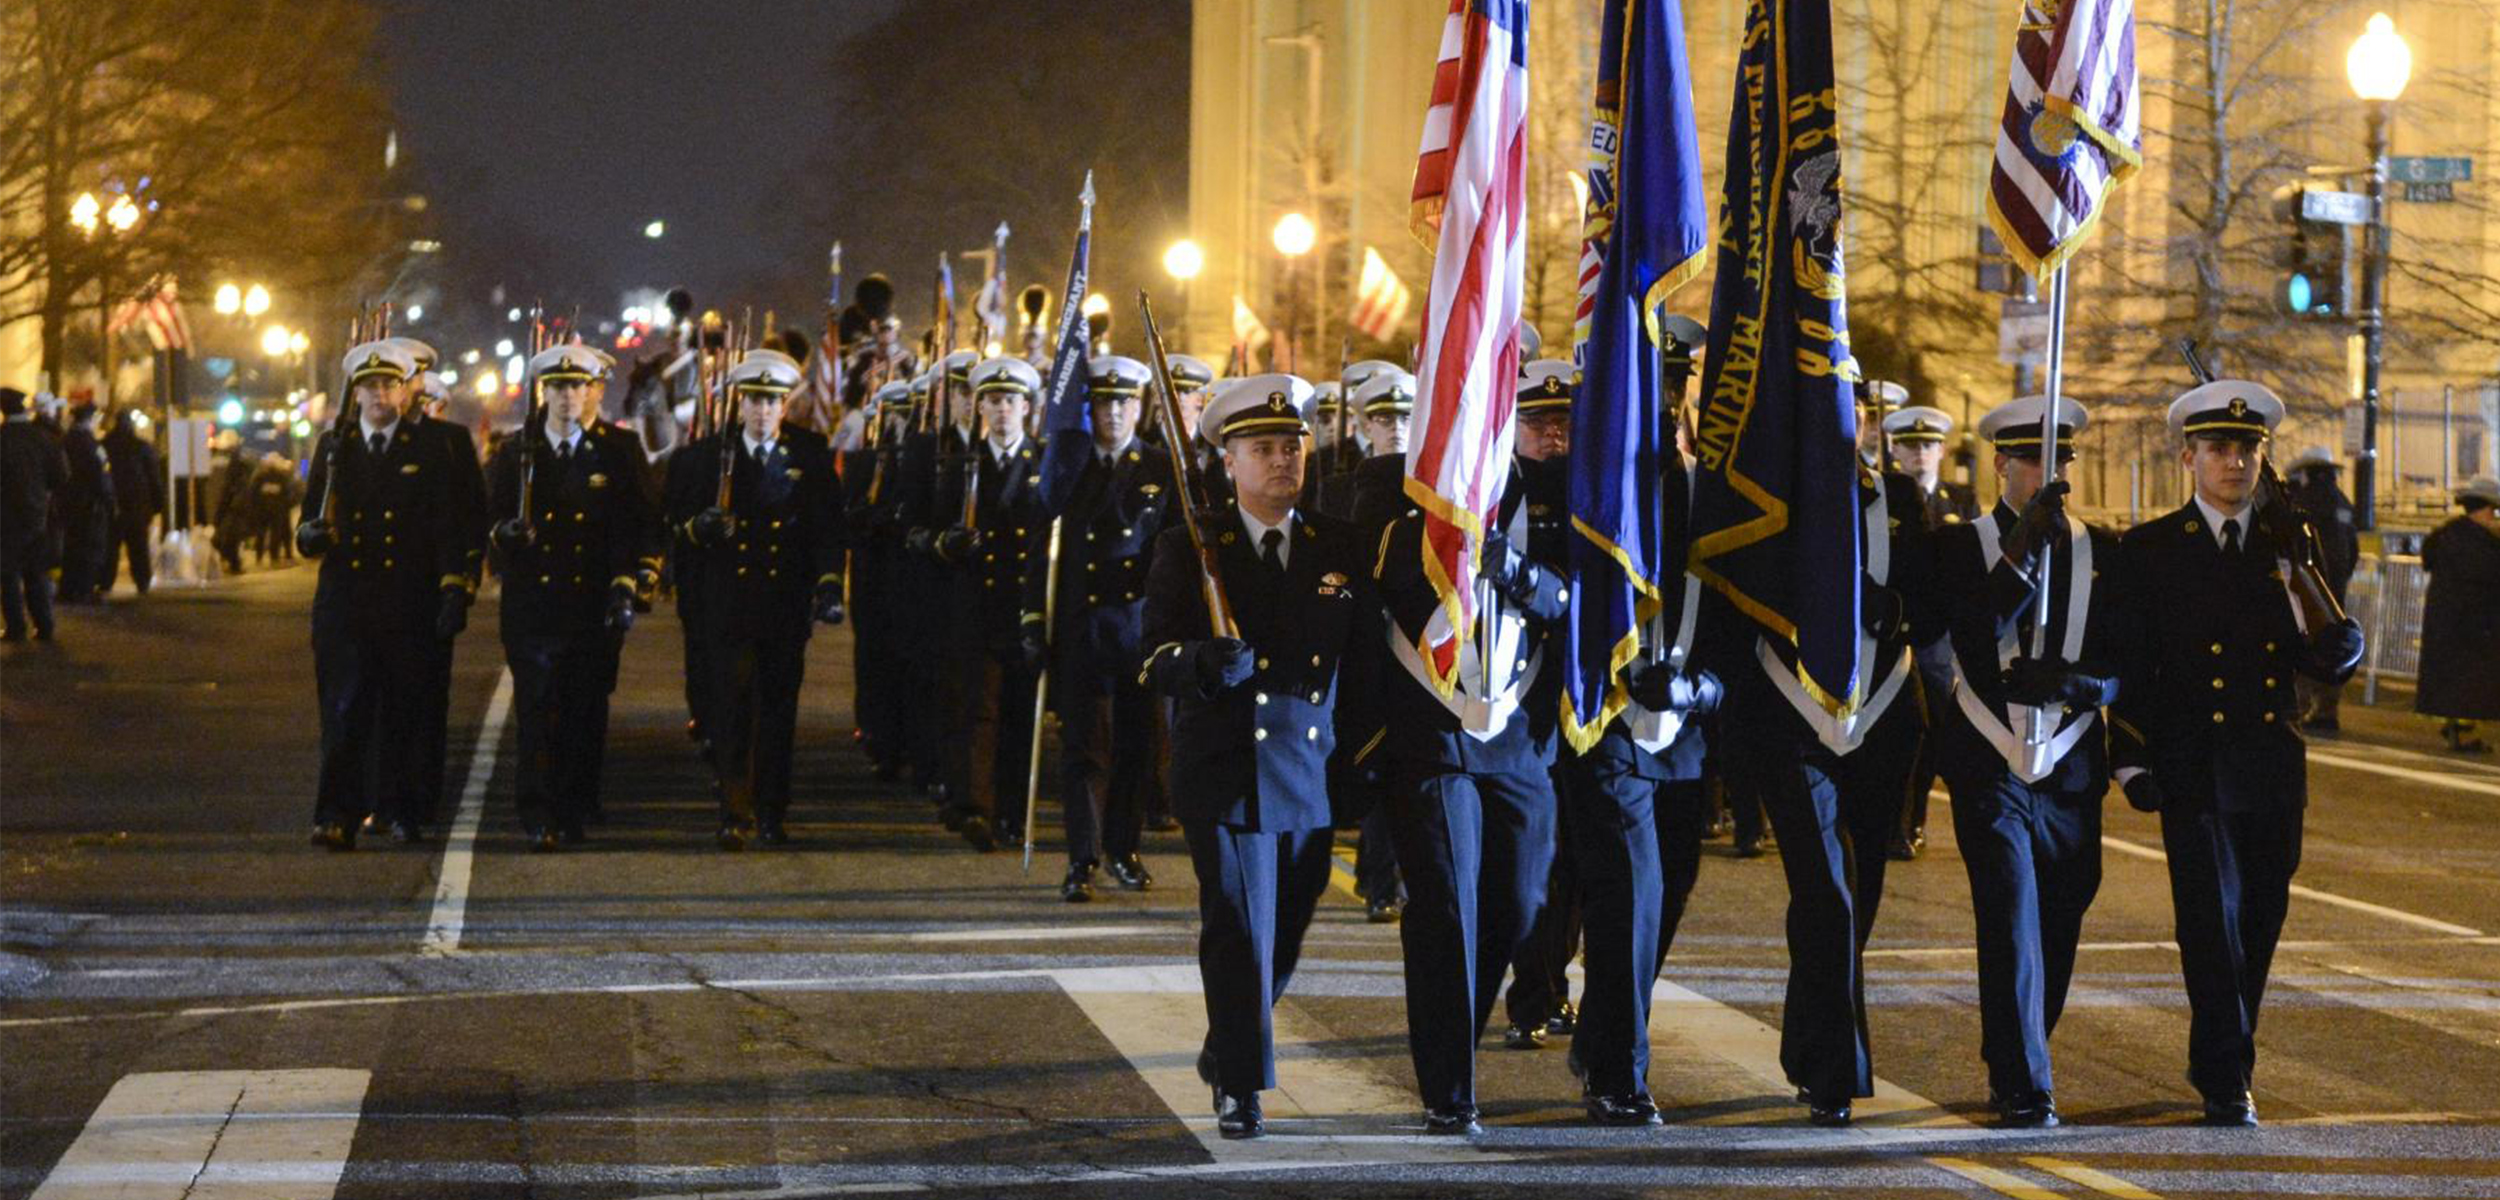 Cadets of the United States Merchant Marine Academy Color Guard march